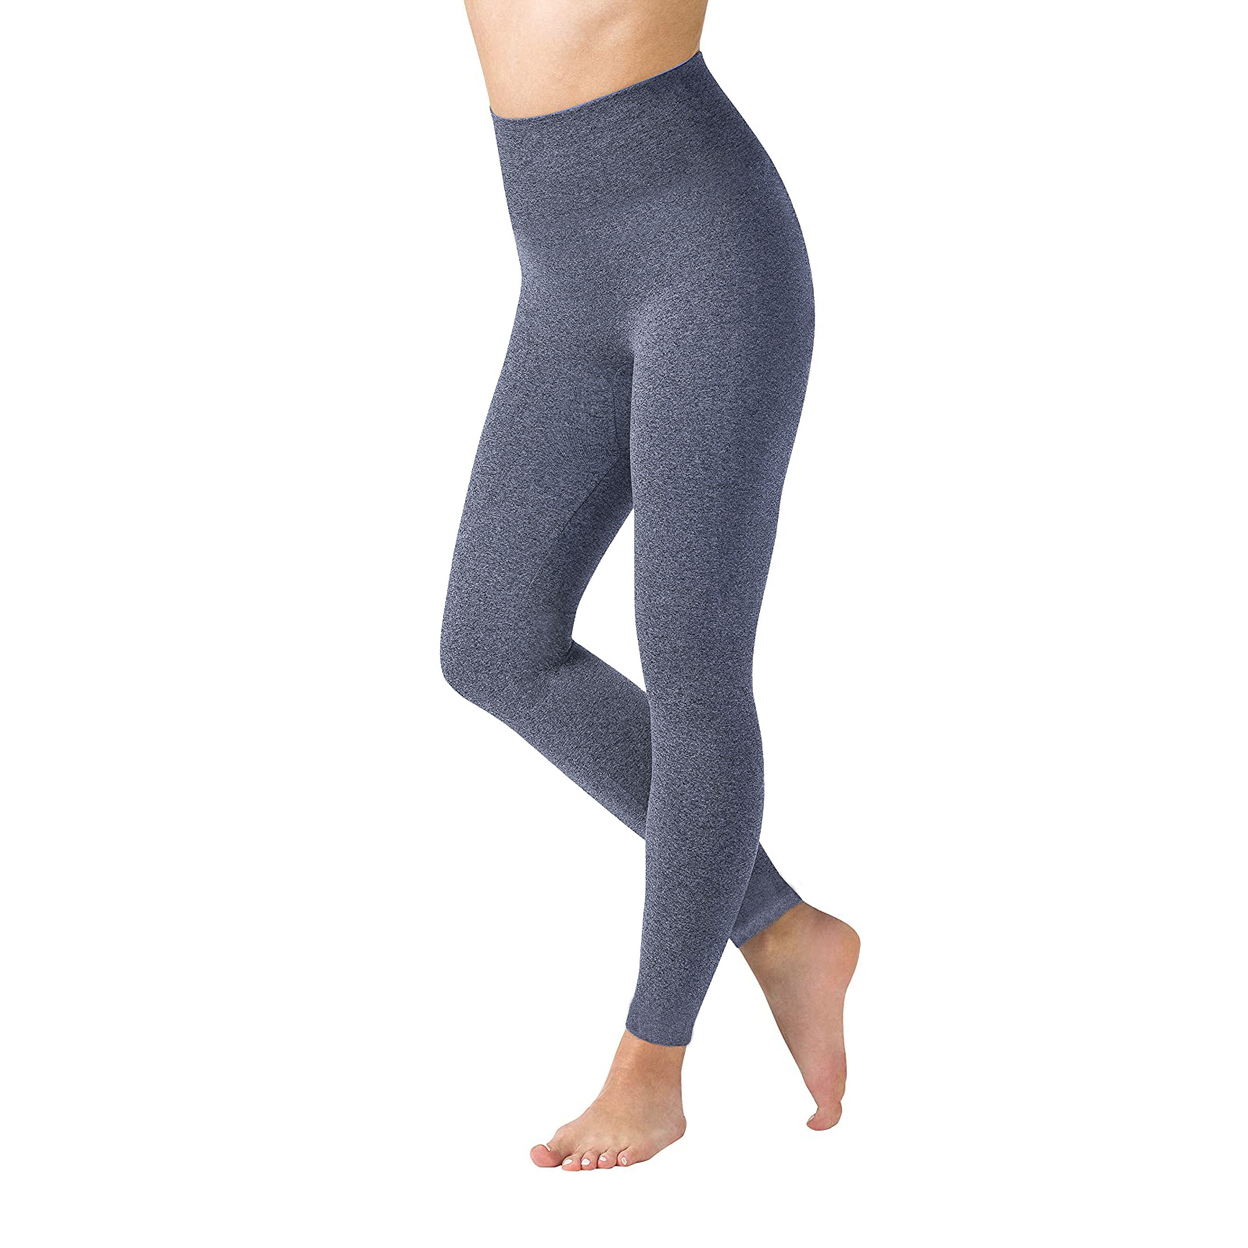 Multi-Pack: Women's High Waisted Ultra-Soft Fleece Lined Warm Marled Leggings(Available In Plus Sizes) - 2-pack, Charcoal & Navy, 1x